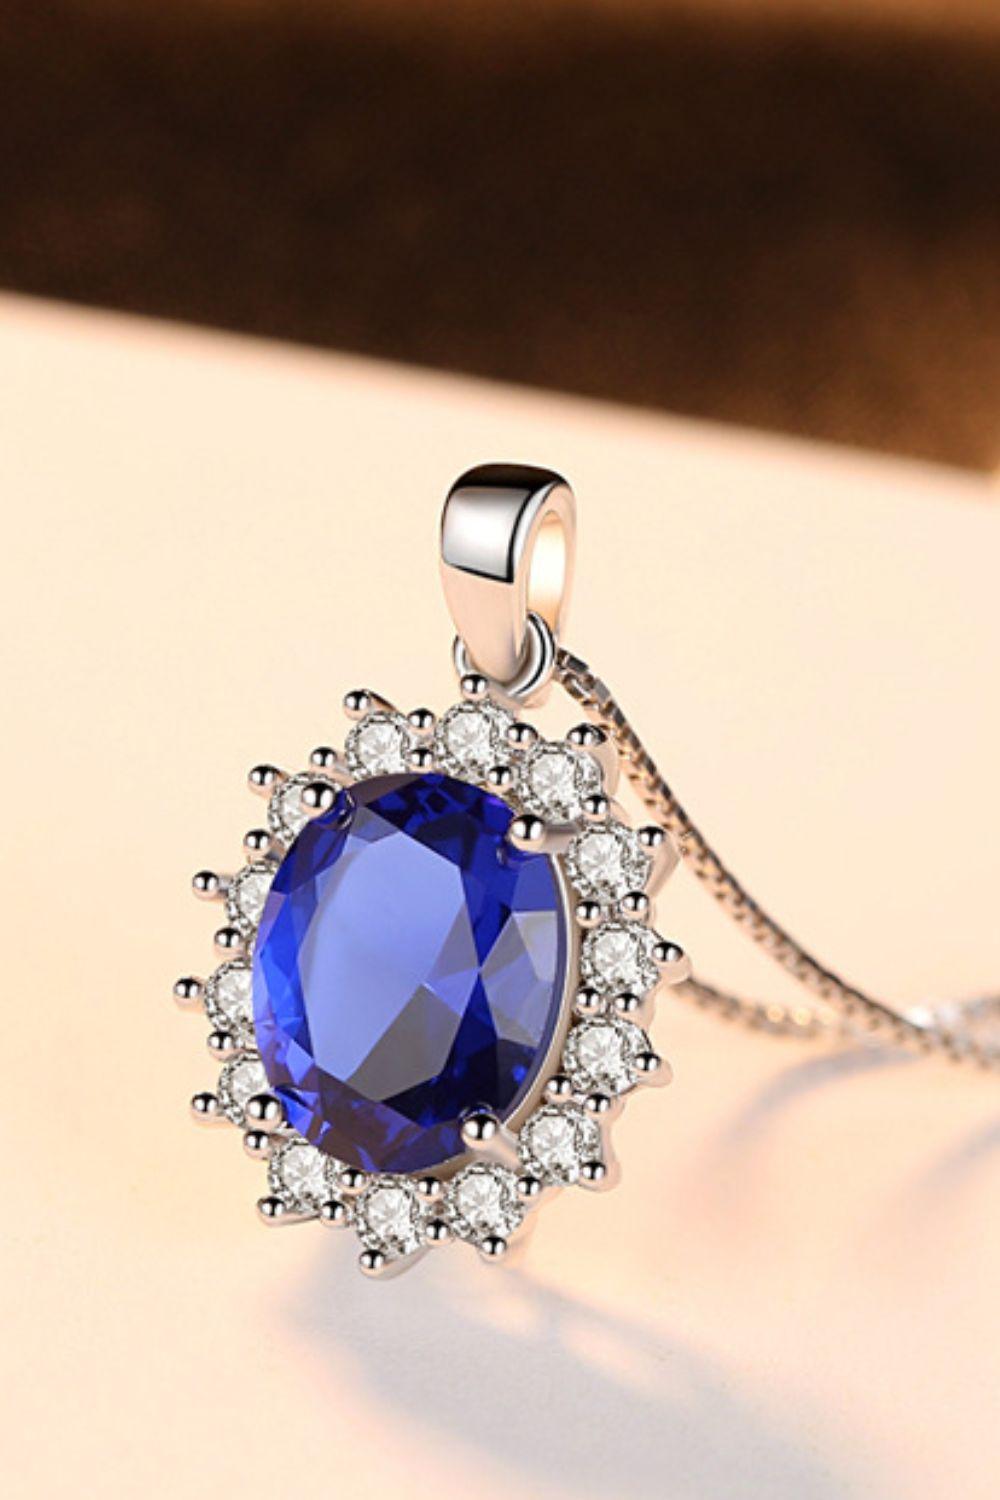 Synthetic Sapphire Pendant 925 Sterling Silver Necklace - Lab Fashion, Home & Health